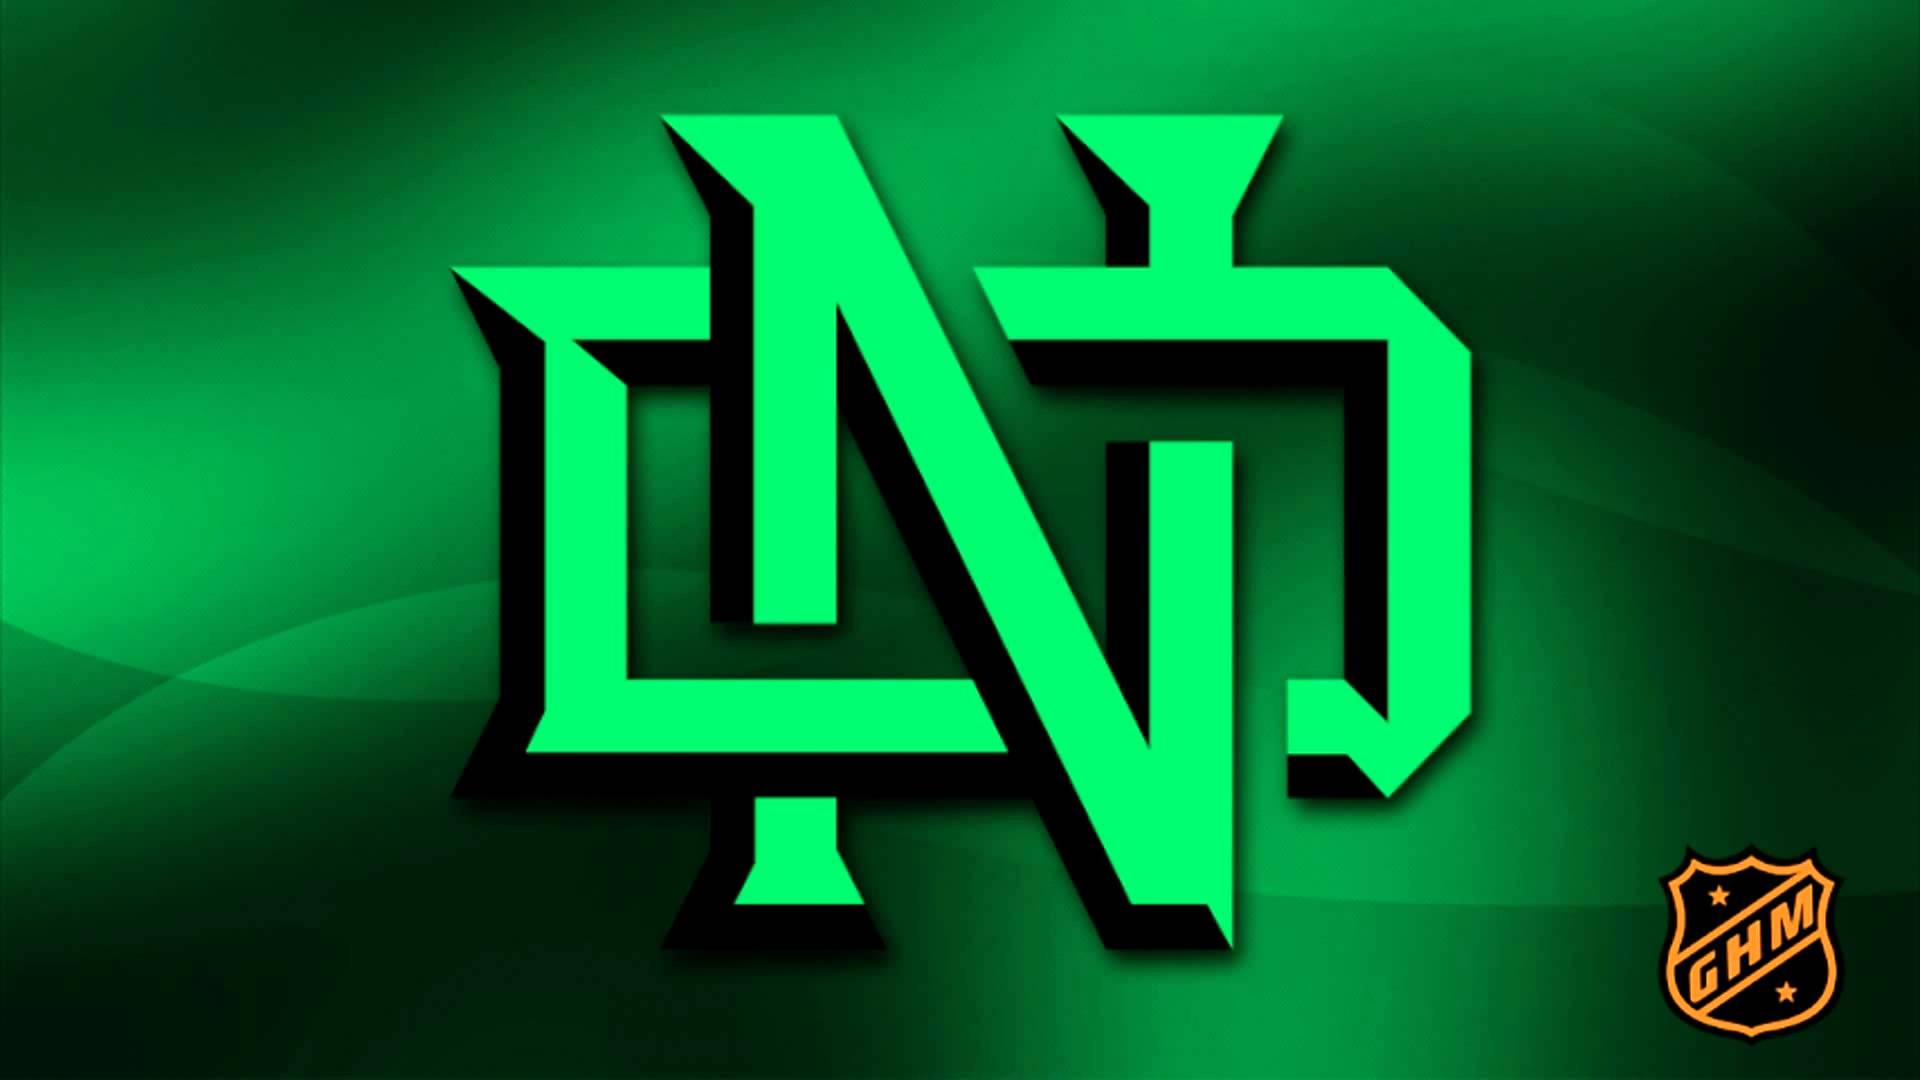 Fighting Sioux Wallpapers 1920x1080